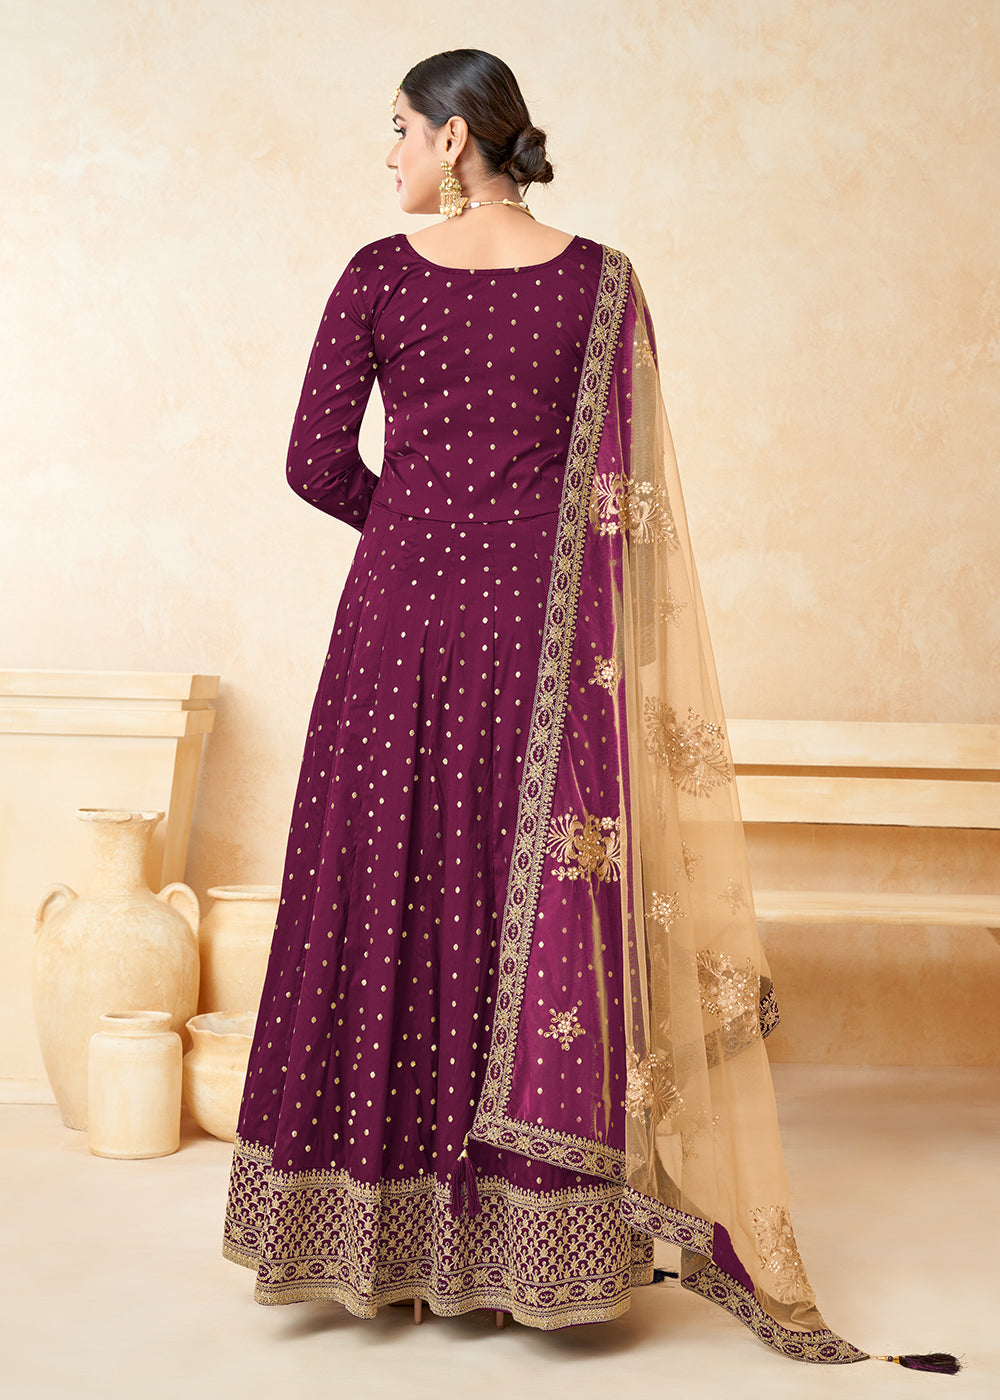 Buy Now Purple Silk Embroidered Indian Ethnic Wear Anarkali Dress Online in USA, UK, Australia, New Zealand, Canada & Worldwide at Empress Clothing.